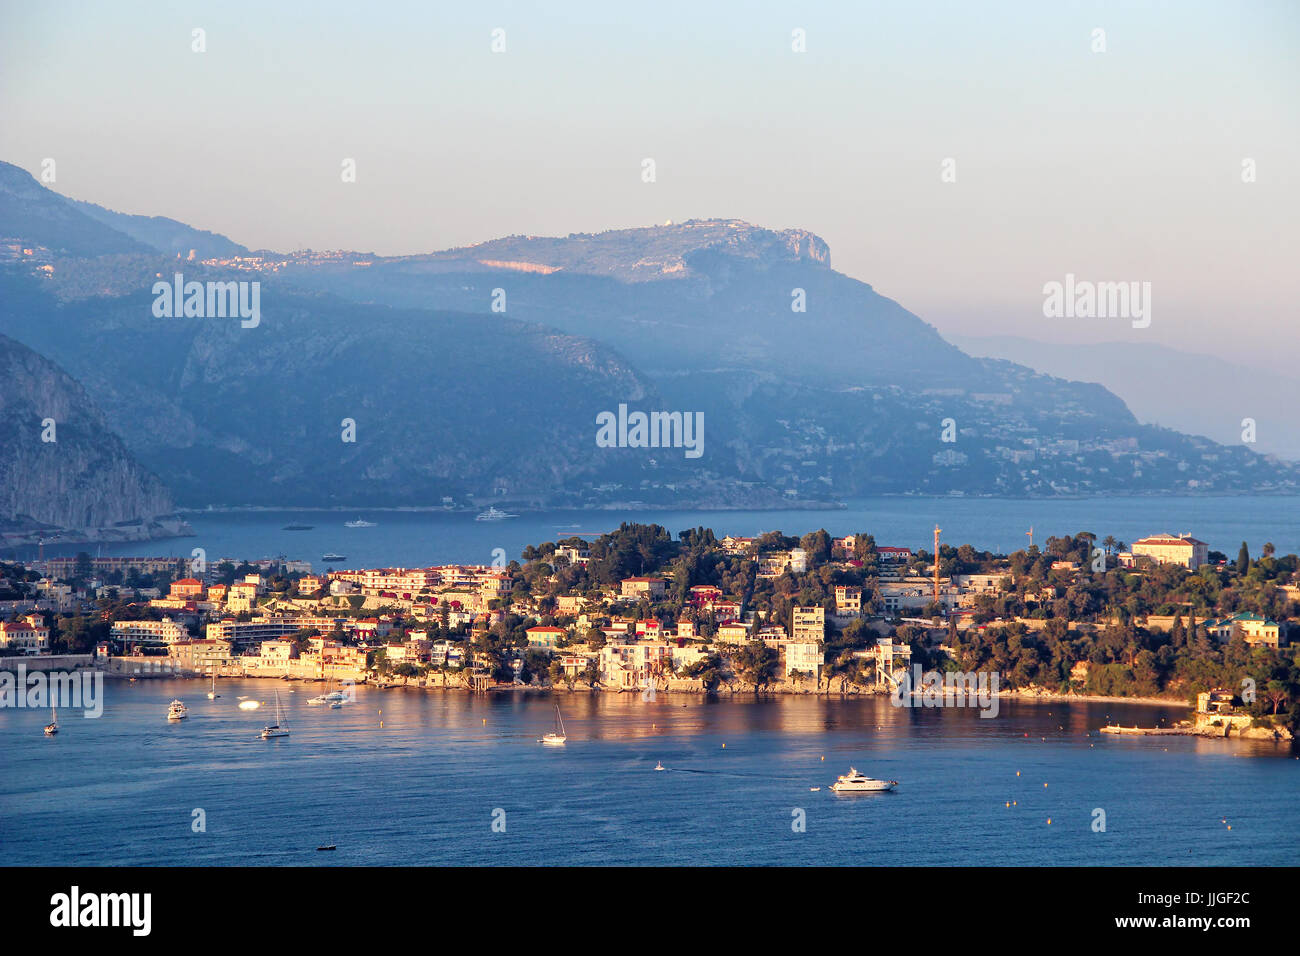 Saint Jean Cap Ferrat High Resolution Stock Photography and Images - Alamy